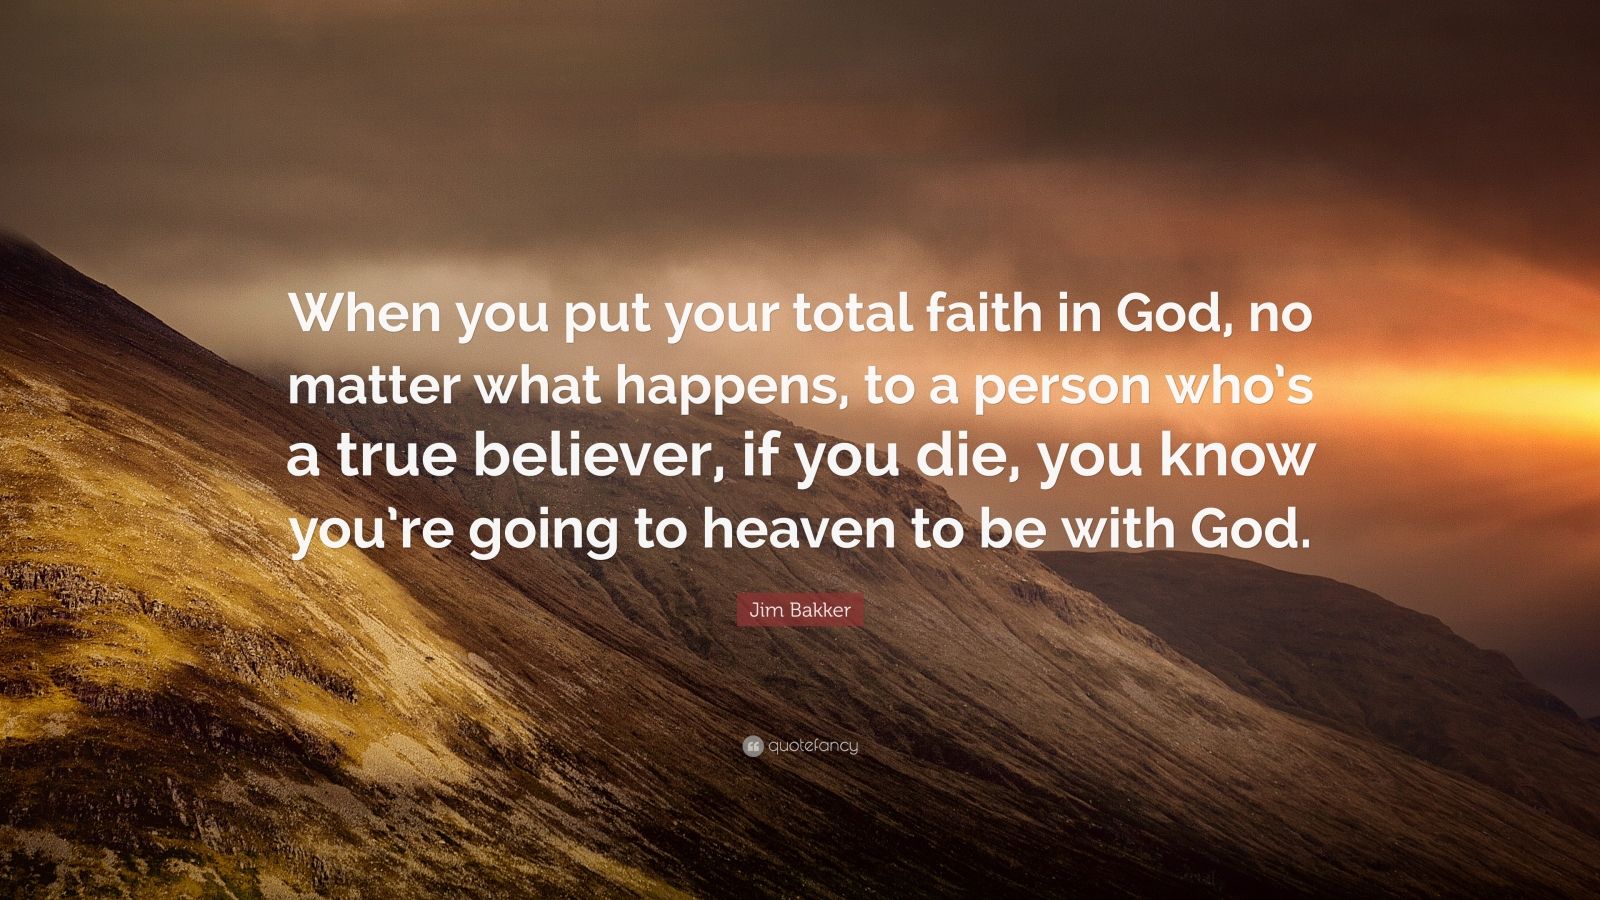 Jim Bakker Quote: “When you put your total faith in God, no matter what ...